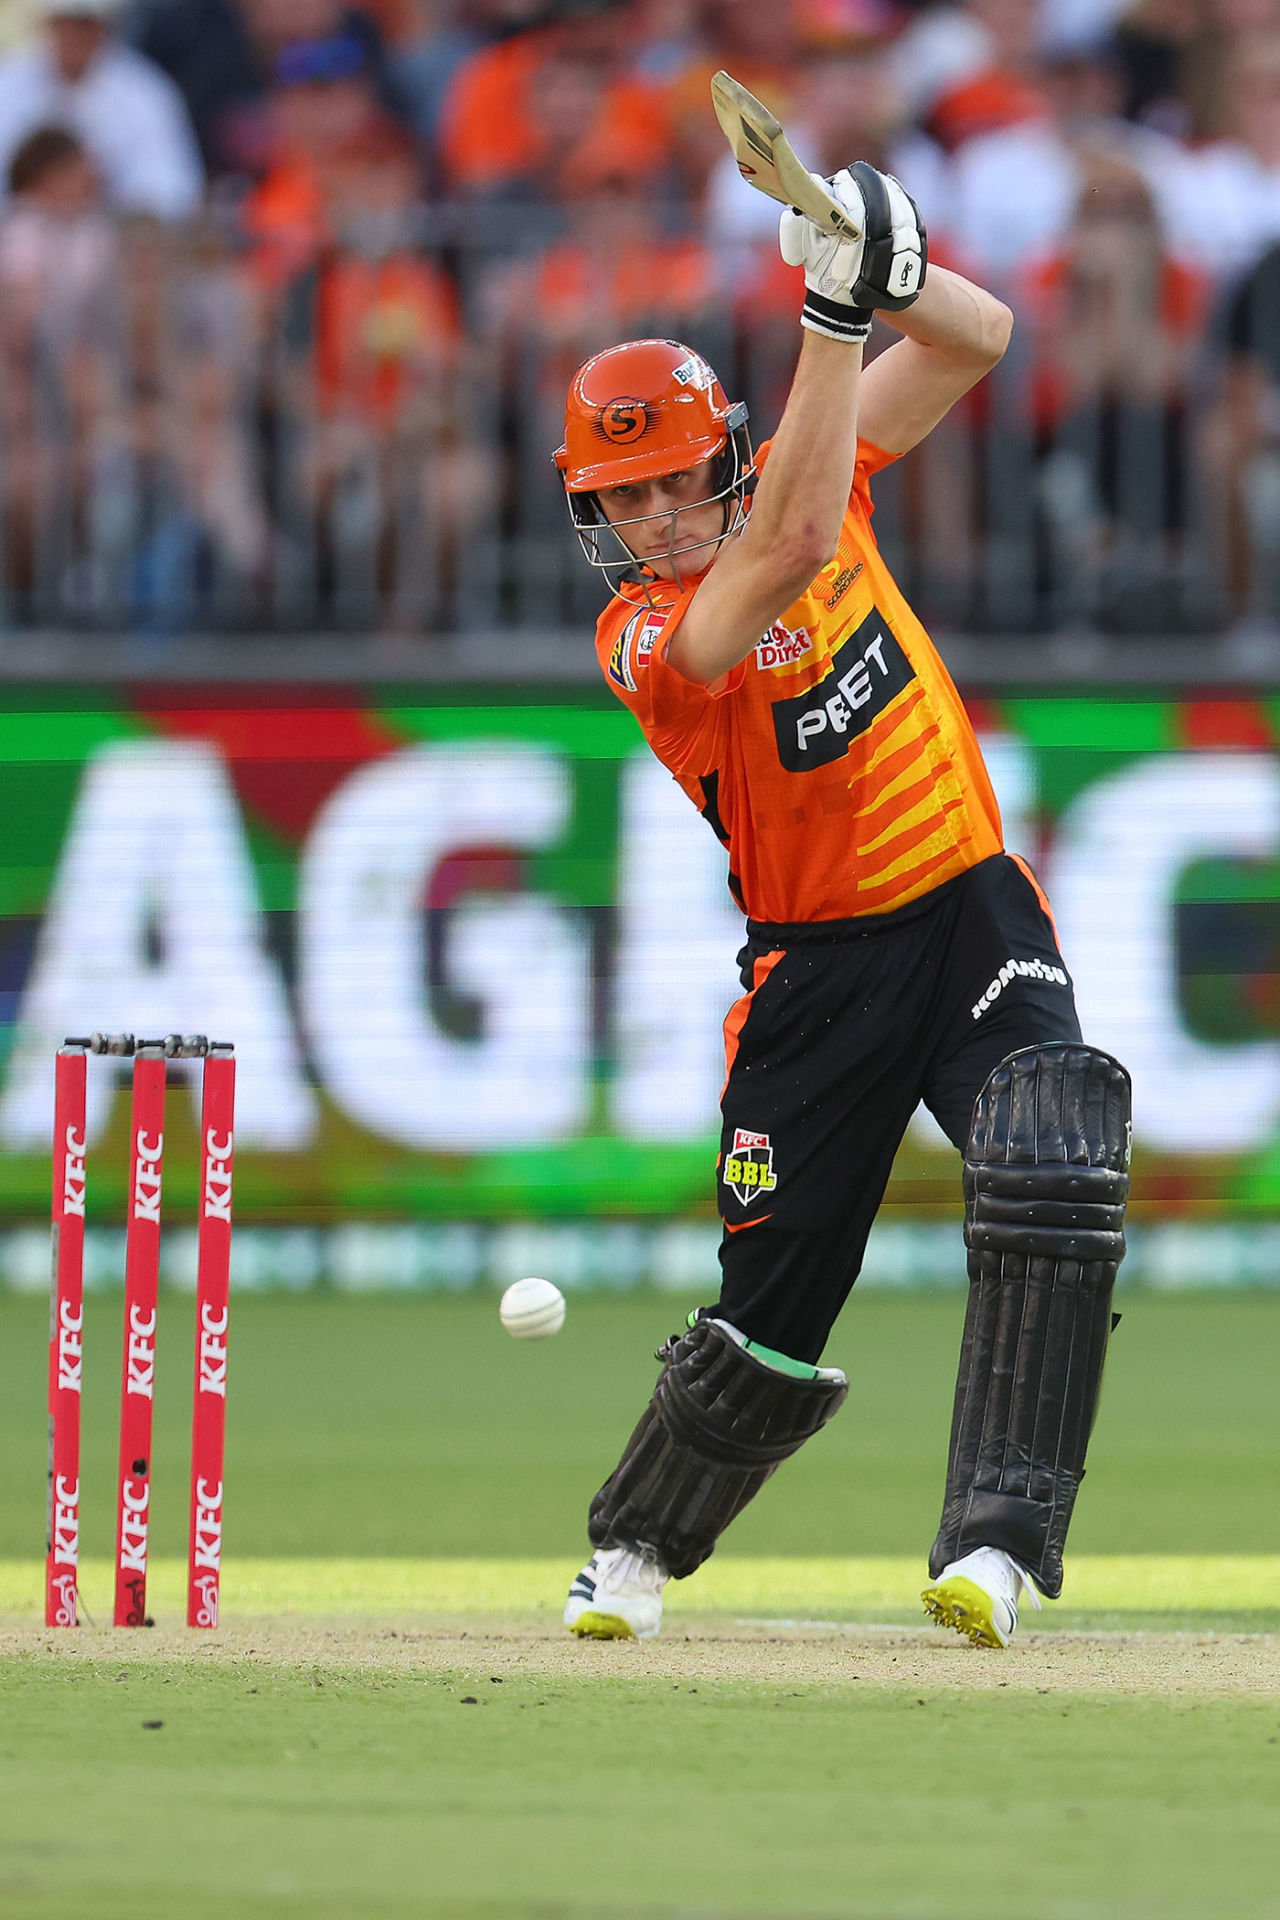 Cameron Bancroft drives early in the chase, Perth Scorchers vs Sydney Sixers, Big Bash League 2022-23, Qualifier, Perth, January 28, 2023